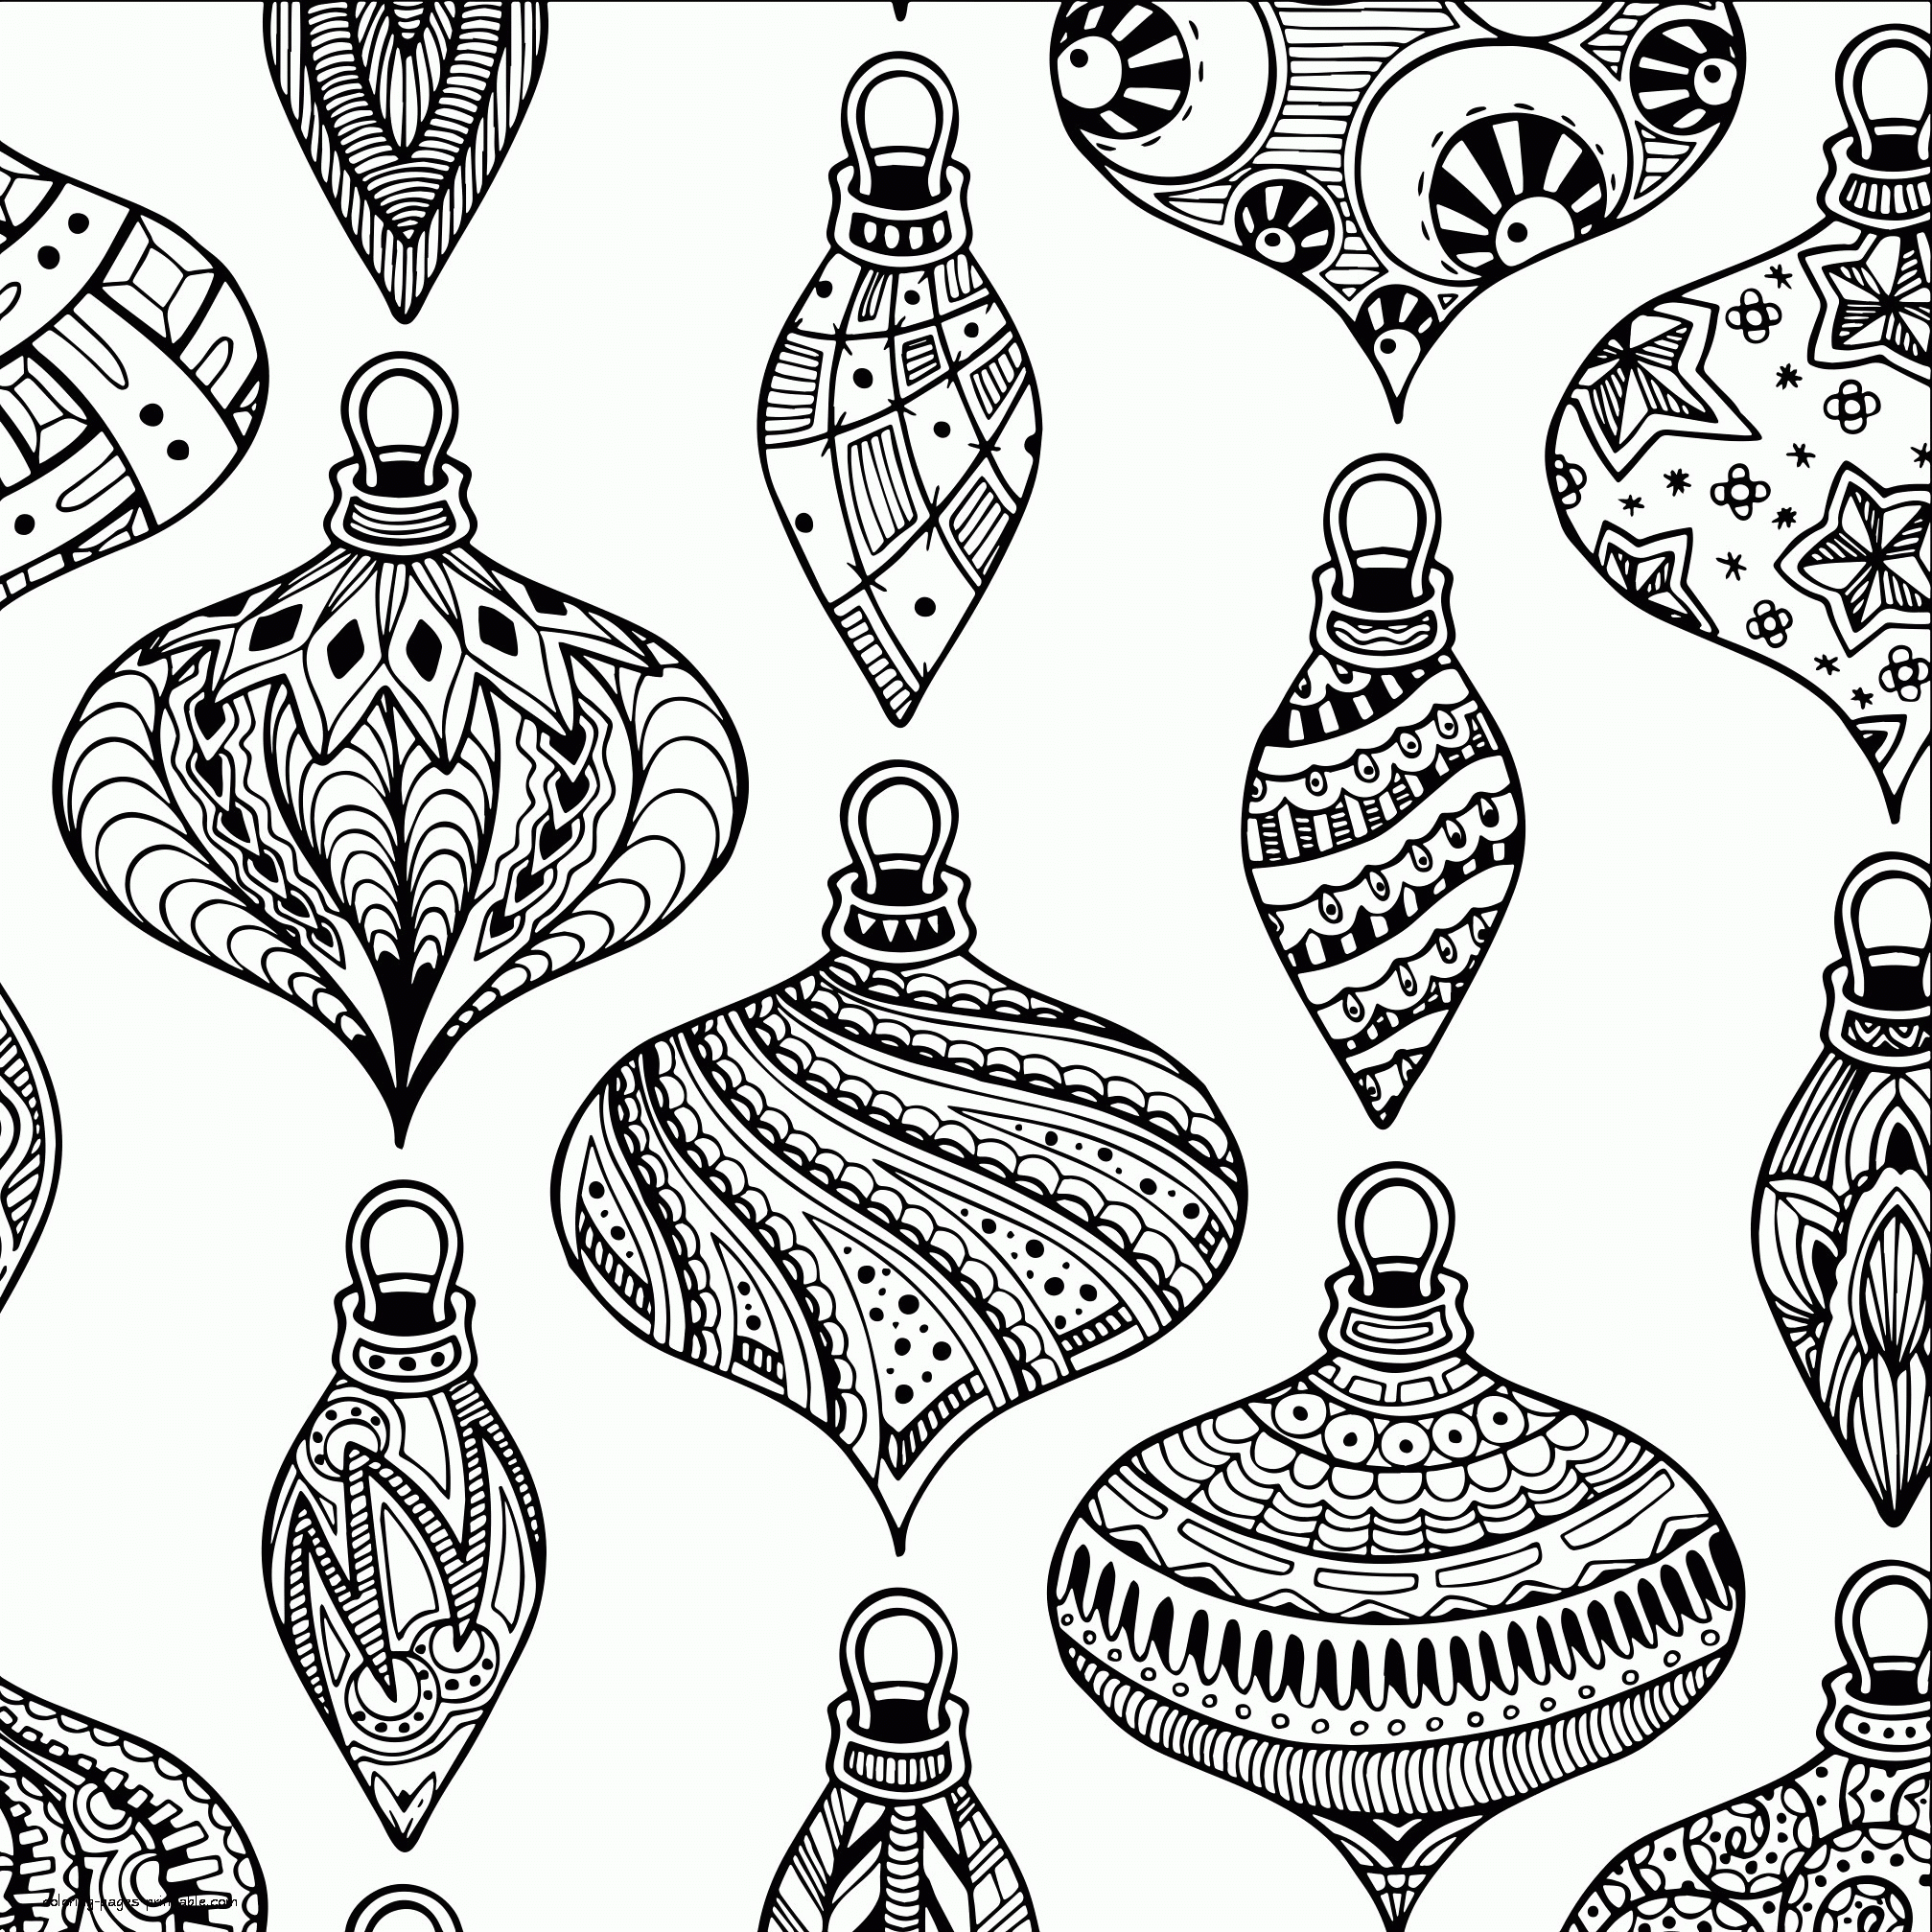 Free Printable Adult Christmas Coloring Pages with Ornament || COLORING